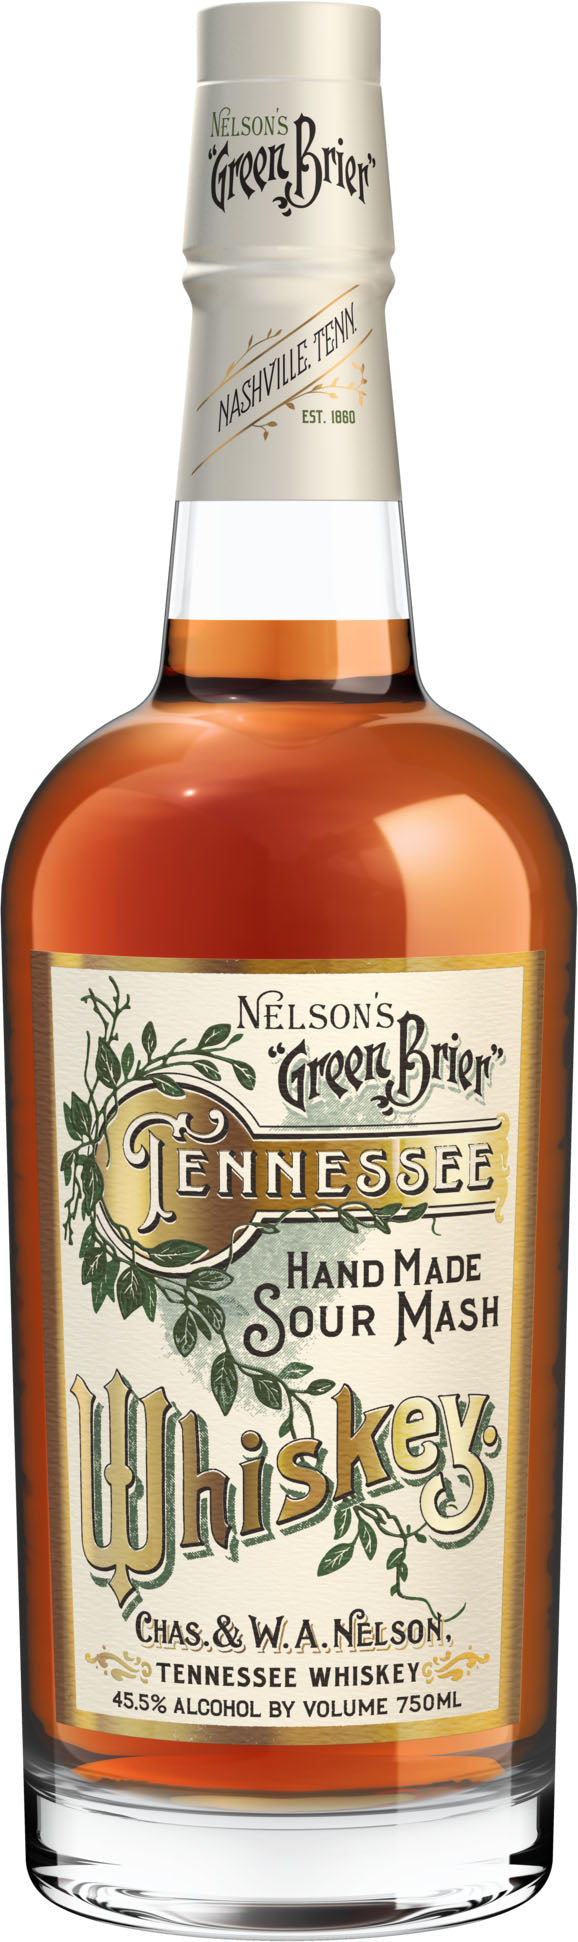 Nelson' Green Brier The Original Tennessee Whiskey